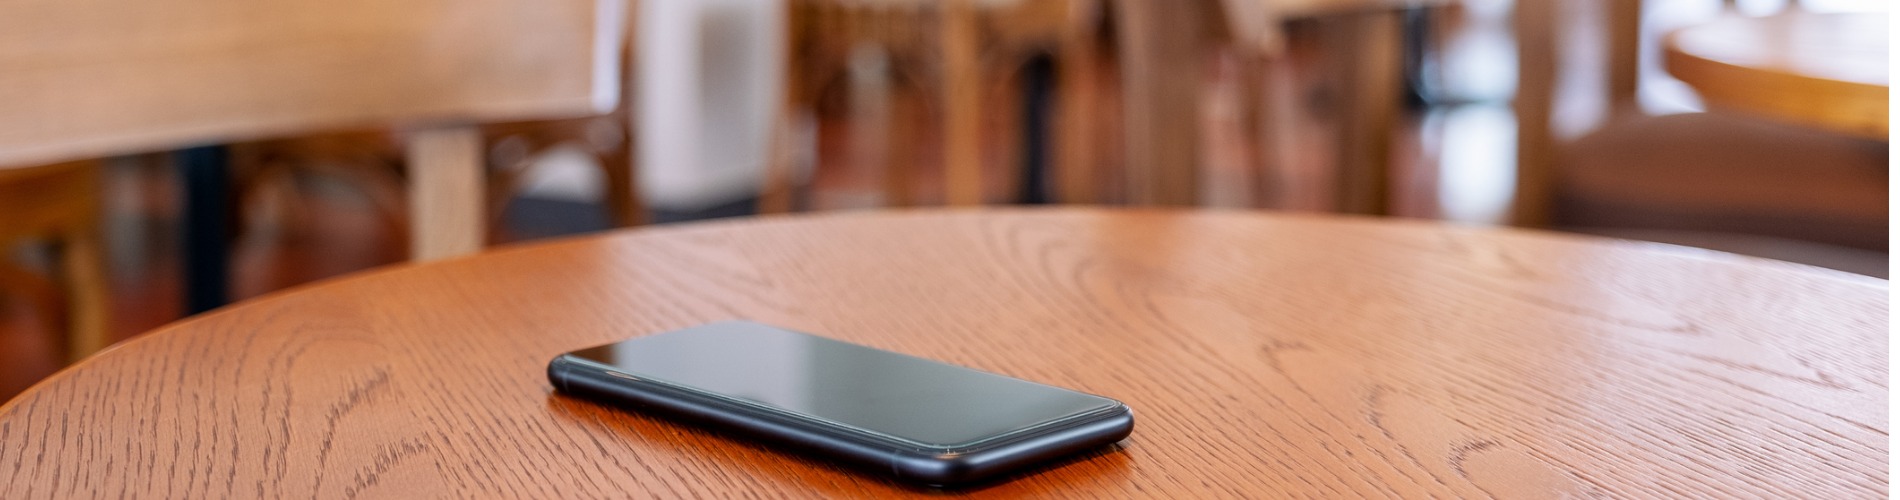 a-black-mobile-phone-on-the-table 1900x500